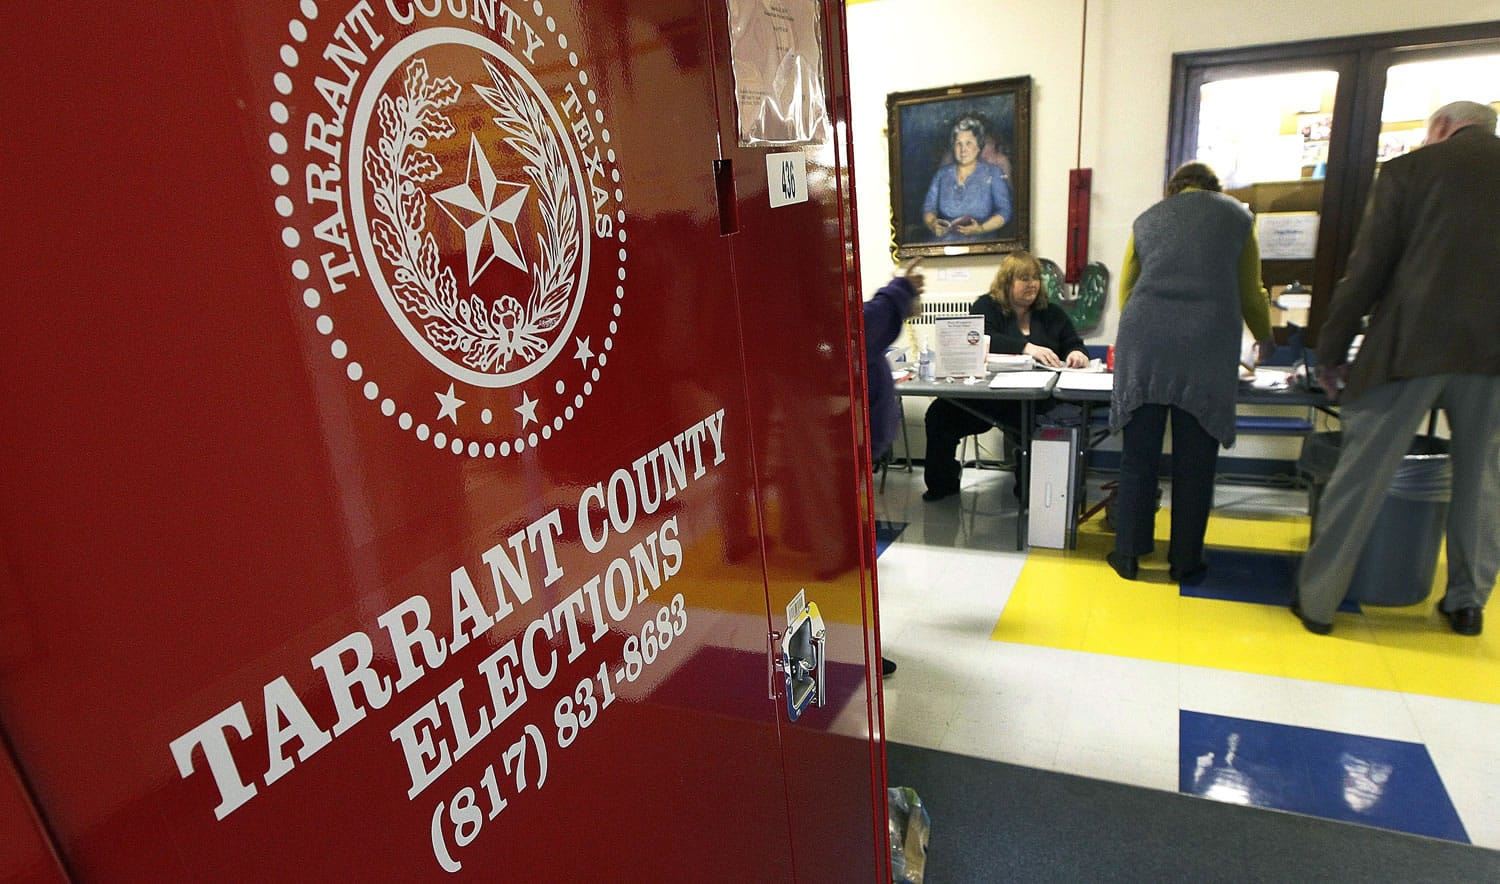 Election officials work the voting area at North Hi Mount Elementary School as children make their way to class Tuesday in Fort Worth, Texas.